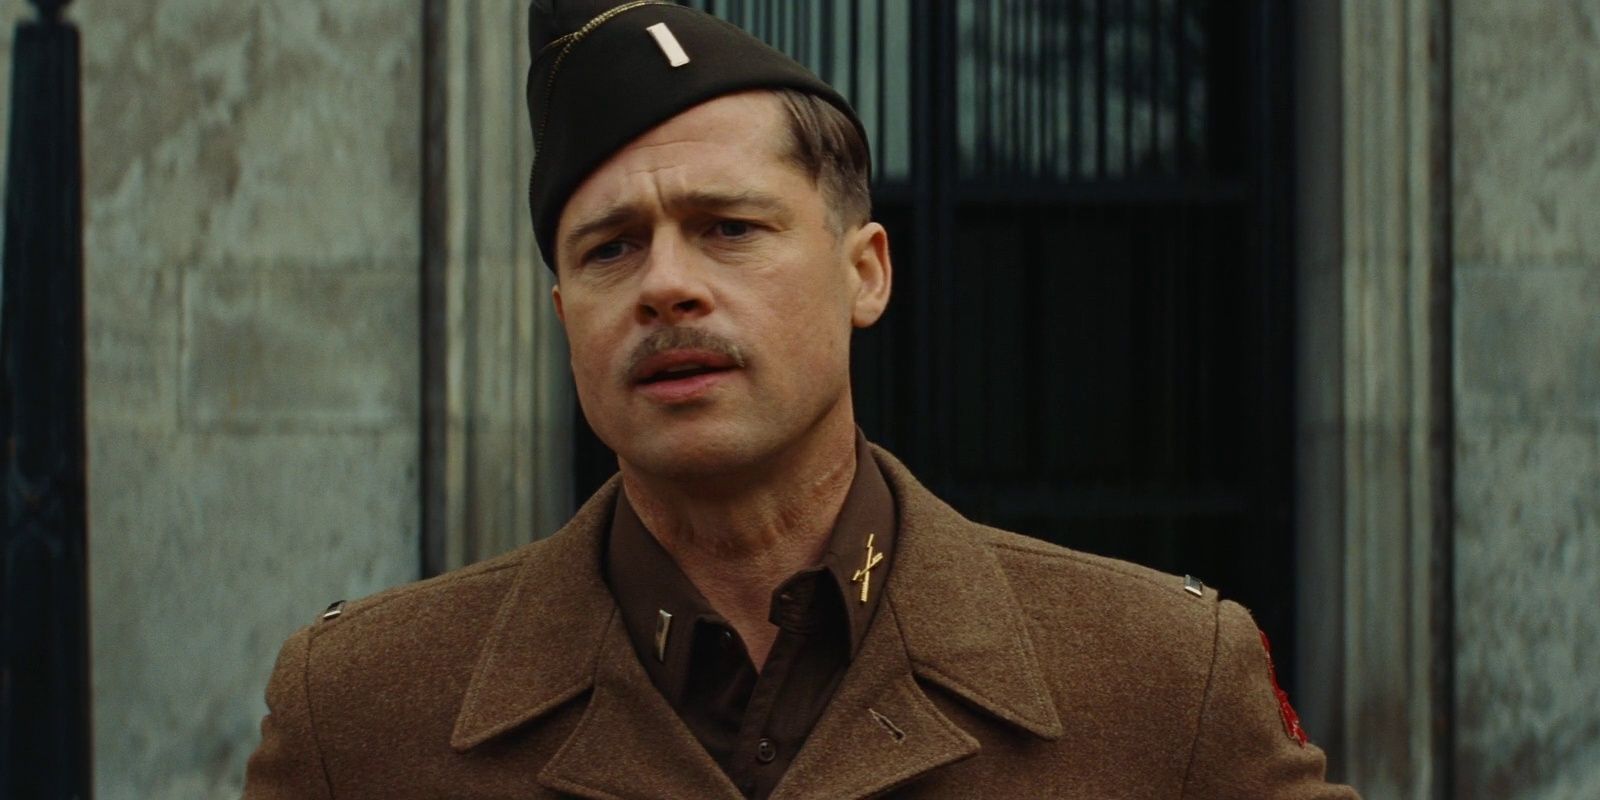 Aldo speaks with the Basterds with a clear scar across his neck in Inglourious Basterds